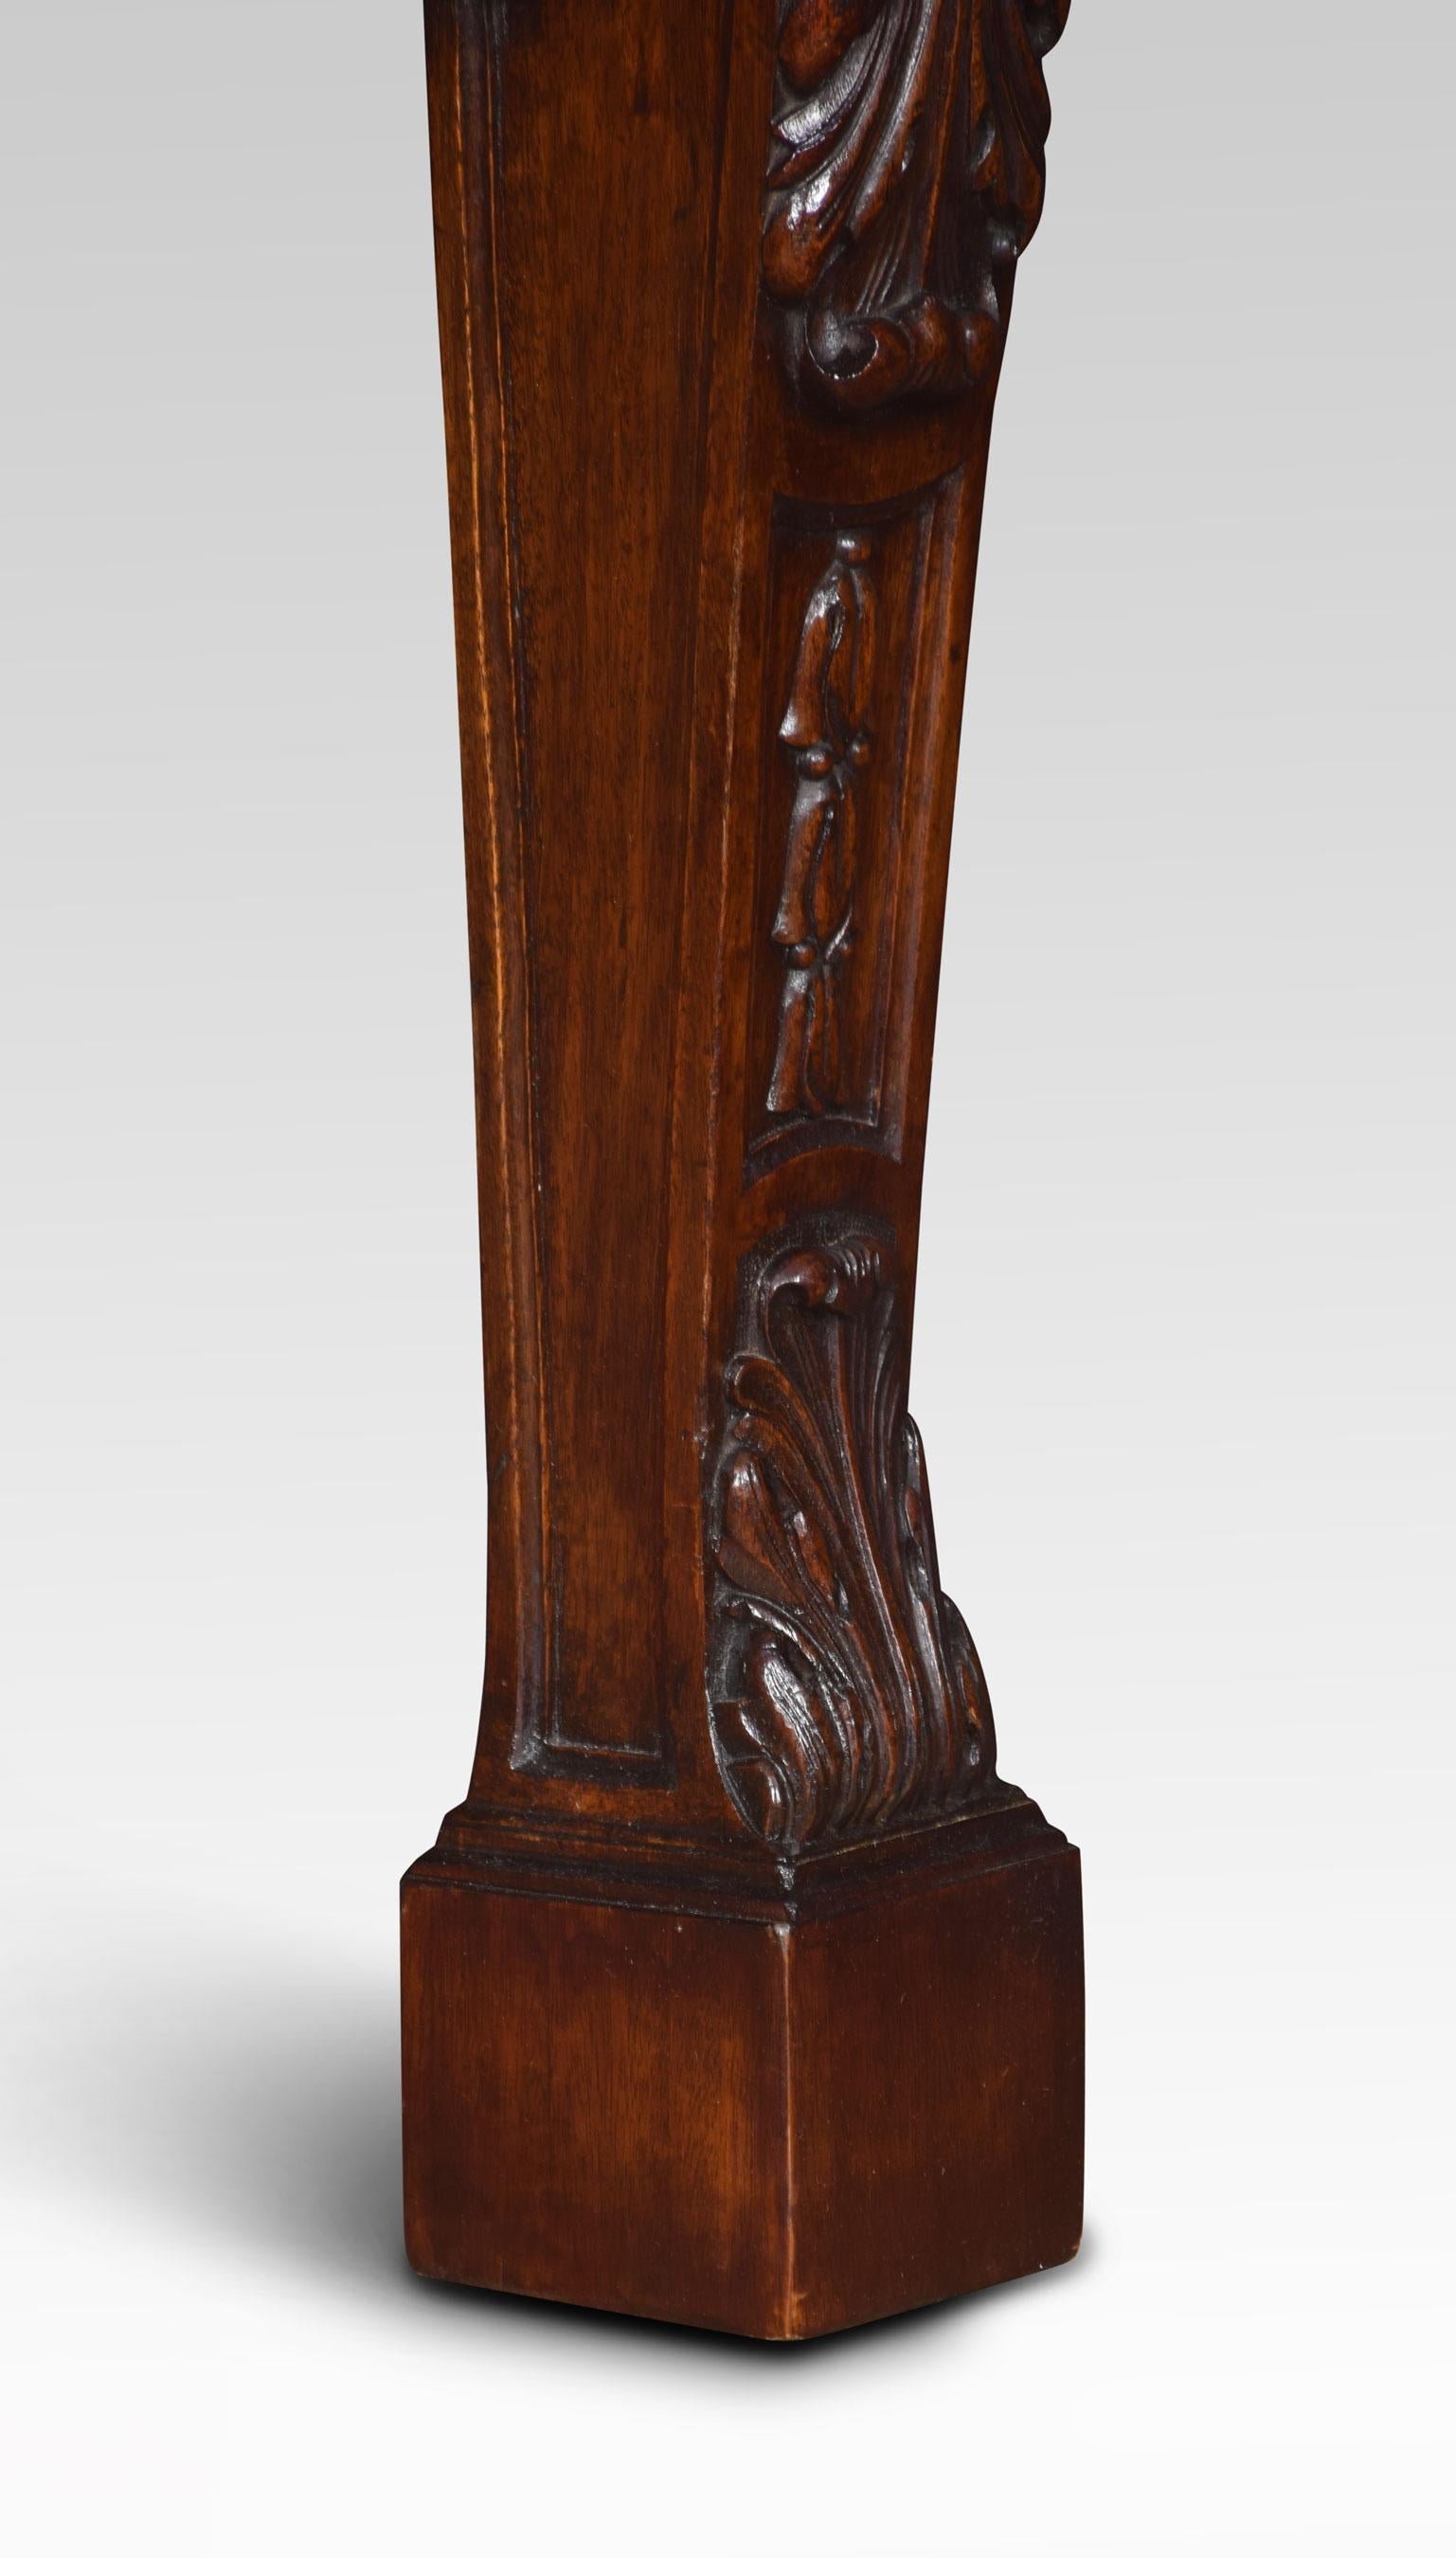 Pair of mahogany console tables, the large rectangular mahogany tops with canted corners over a plain frieze supported on carved scrolling supports terminating in block feet.
Dimensions:
Height 31 inches
Width 43 inches
Depth 17 inches.